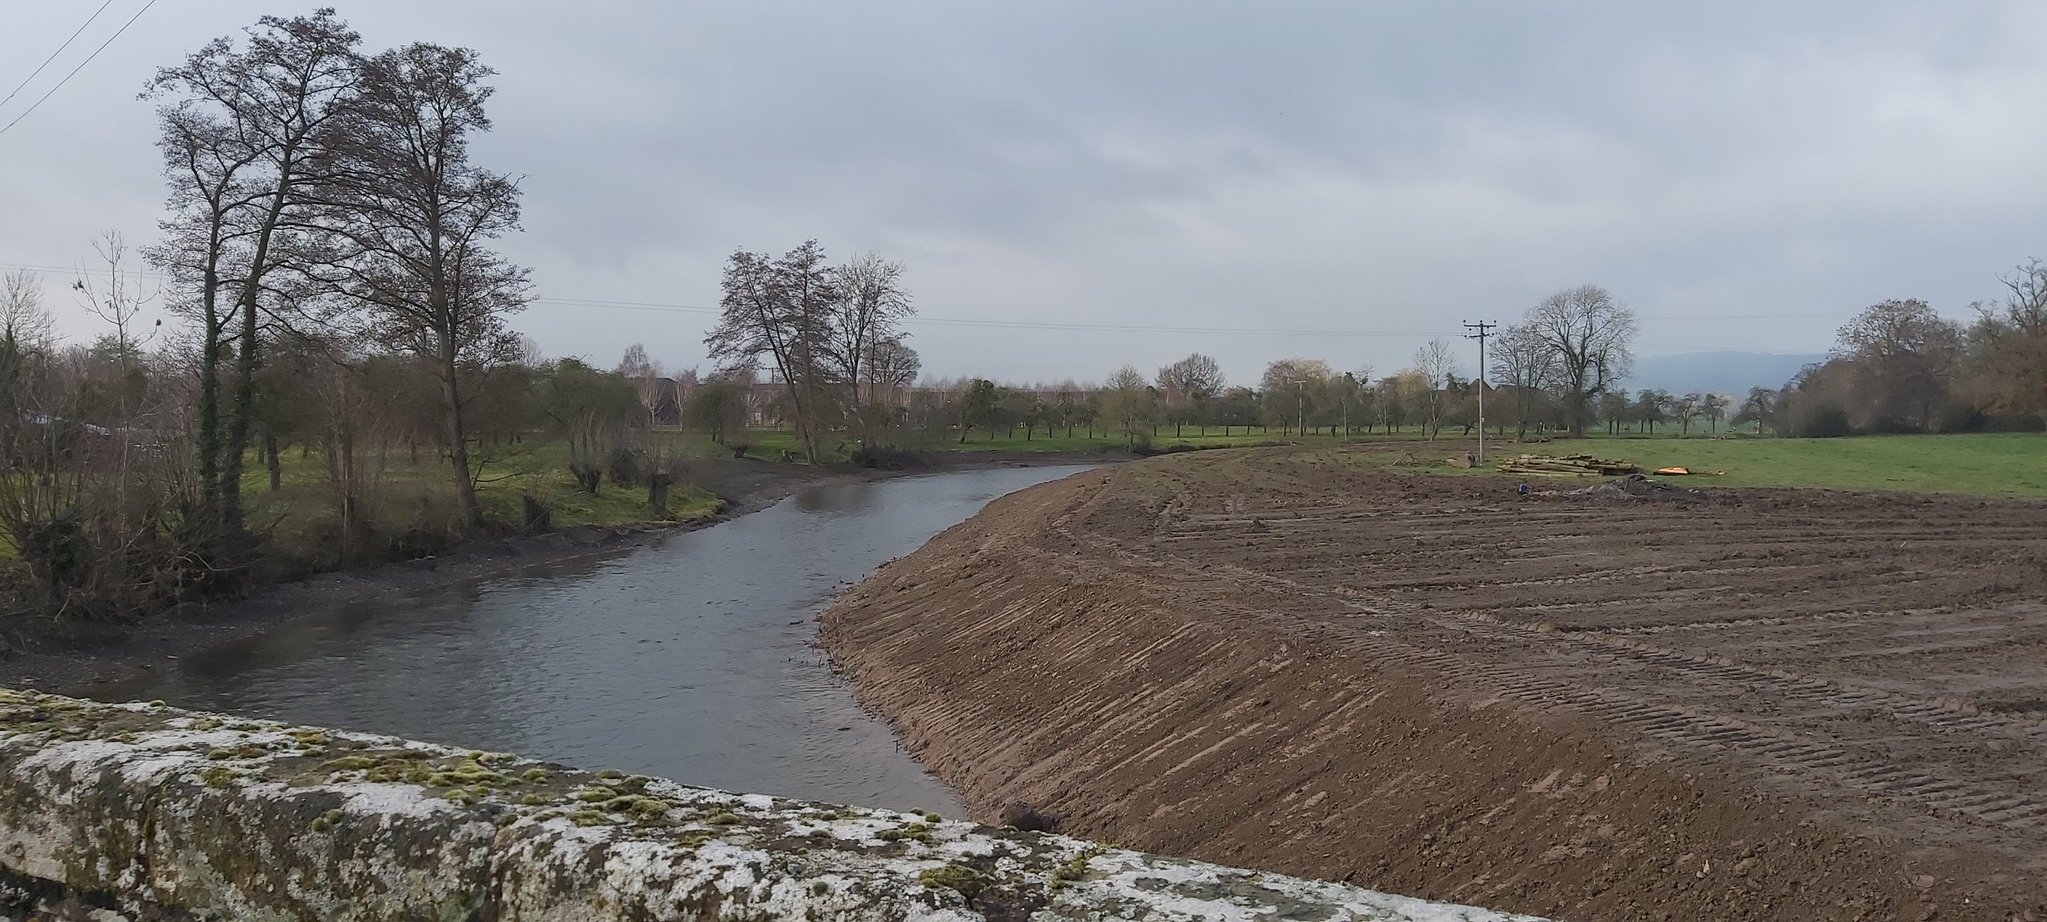 NEWS | River Lugg: Farmer has only removed trees that came down during flooding